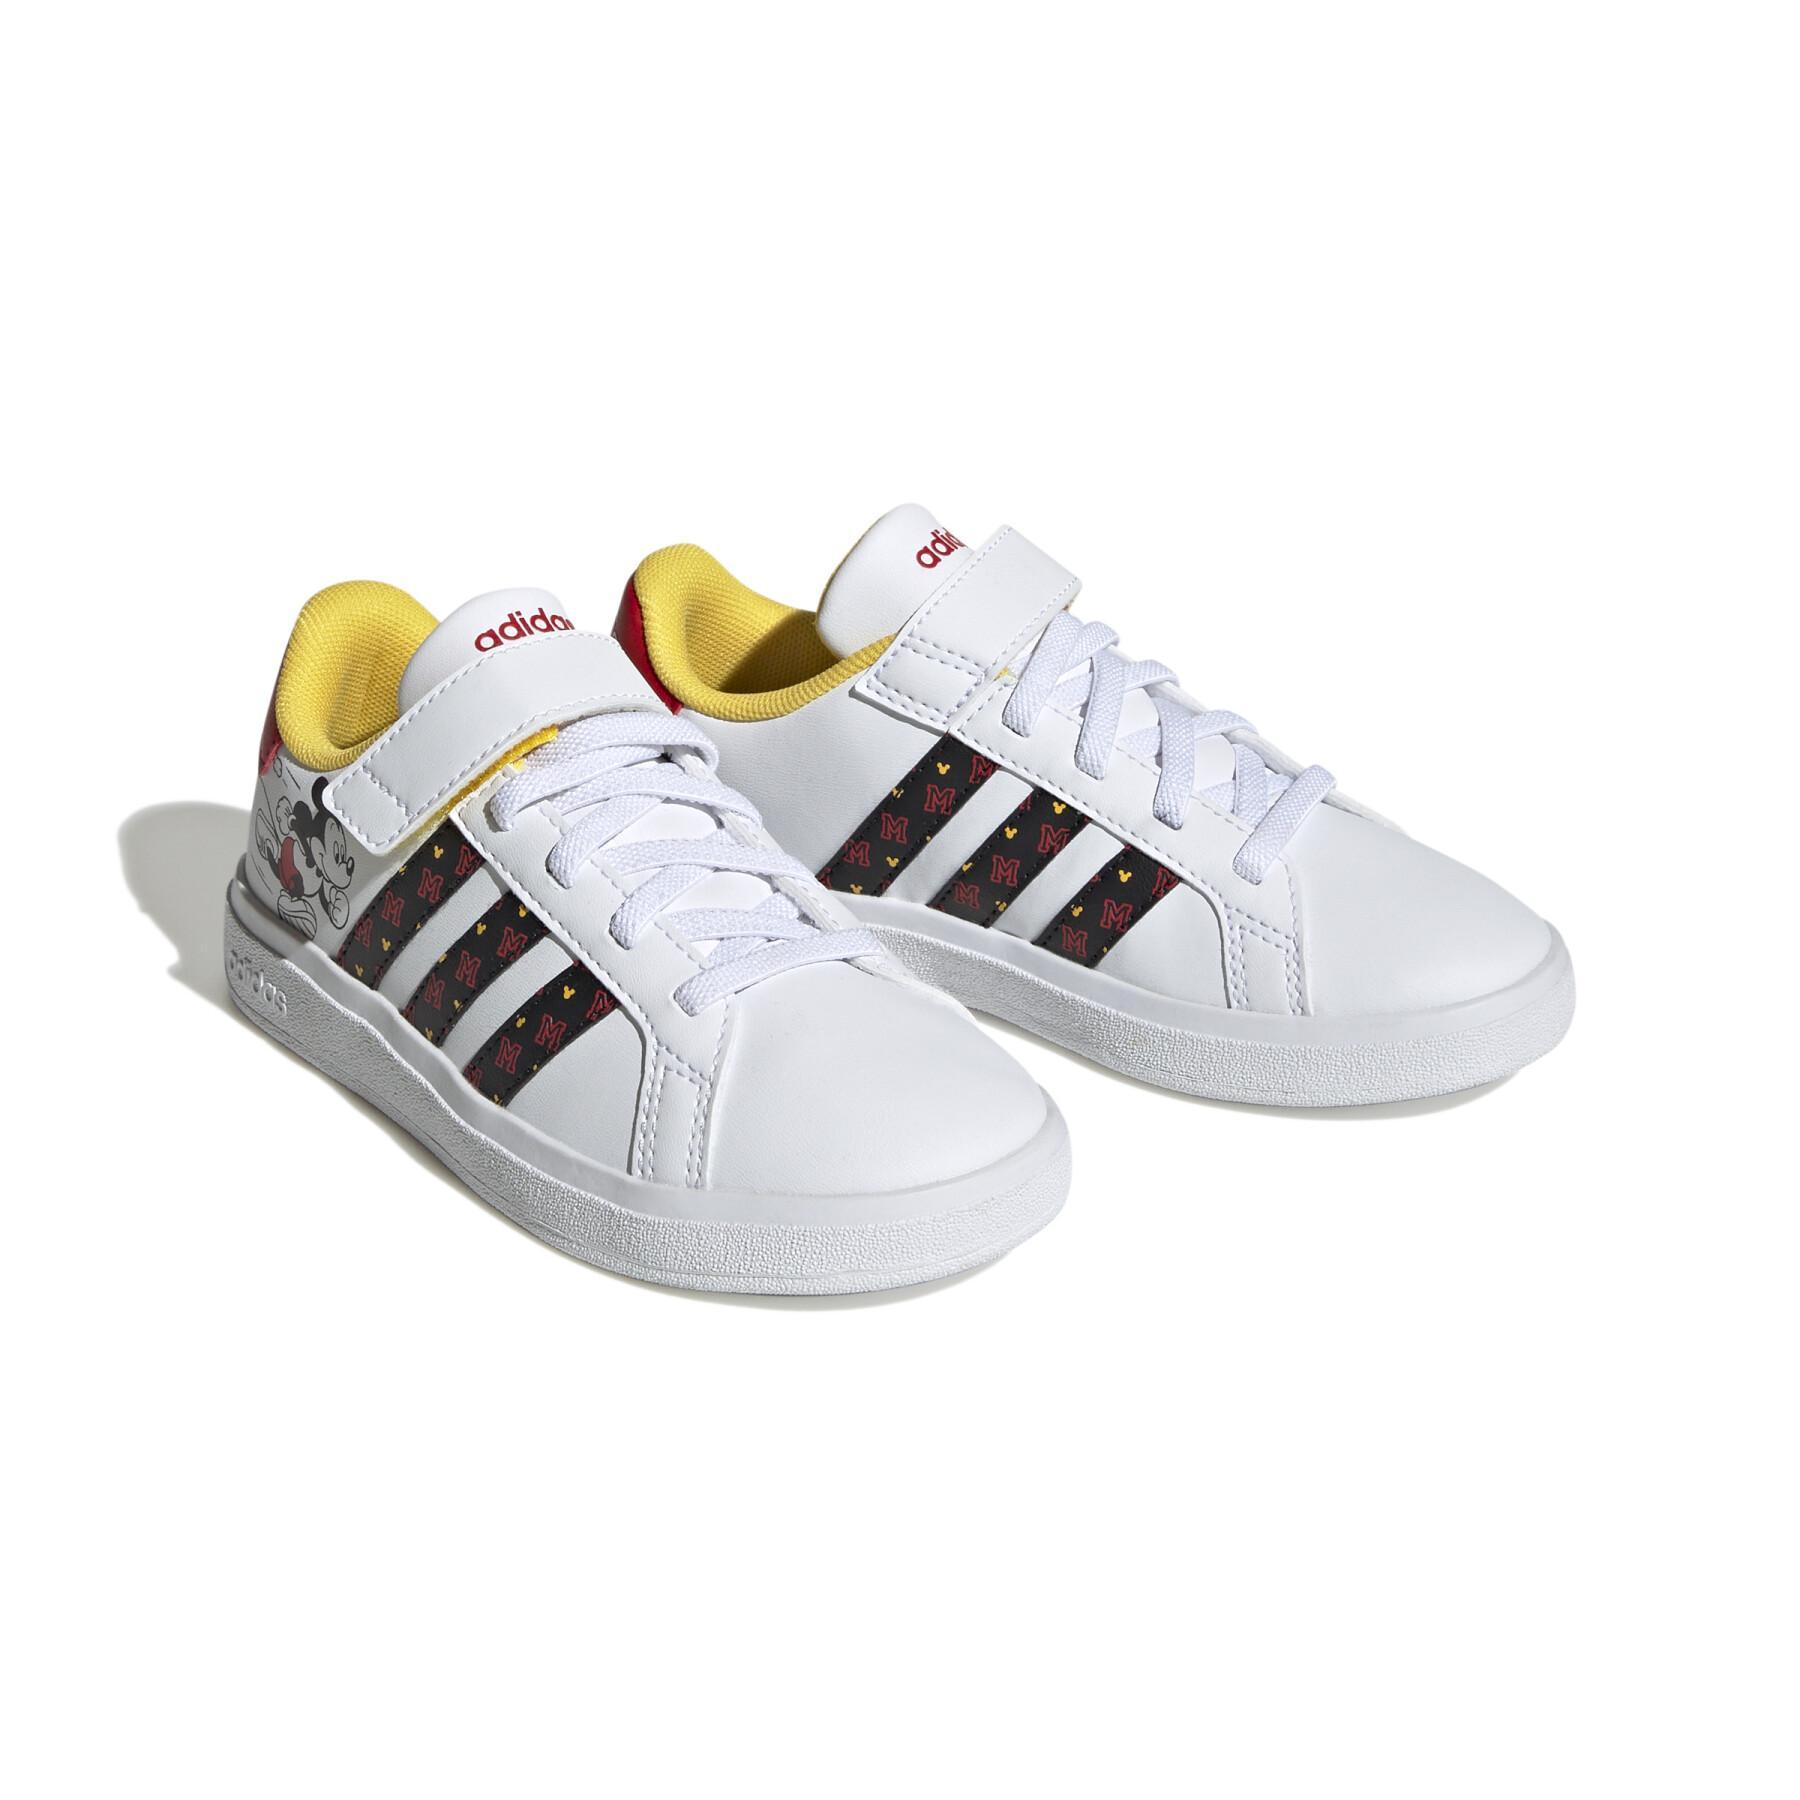 Scratch sneakers for kids adidas X Disney Grand Court Mickey